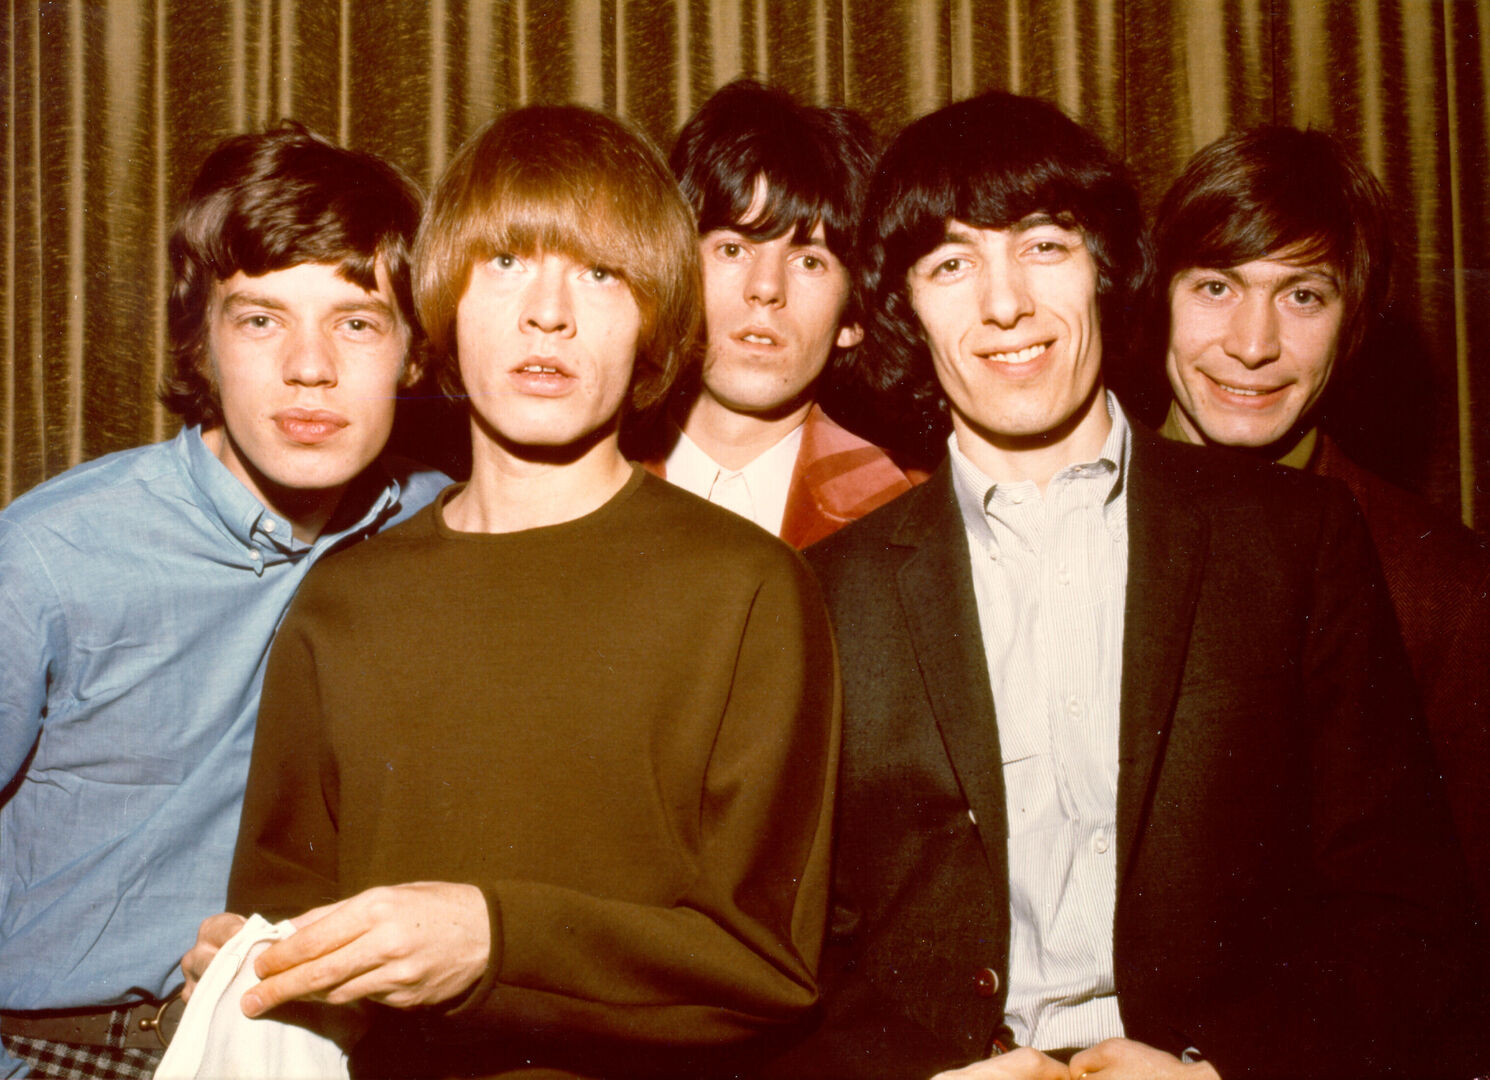 The-Stones-and-Brian-Jones_st_3_jpg_sd-high_Copyright-Getty-Images-Photo-courtesy-of-Magnolia-Pictures